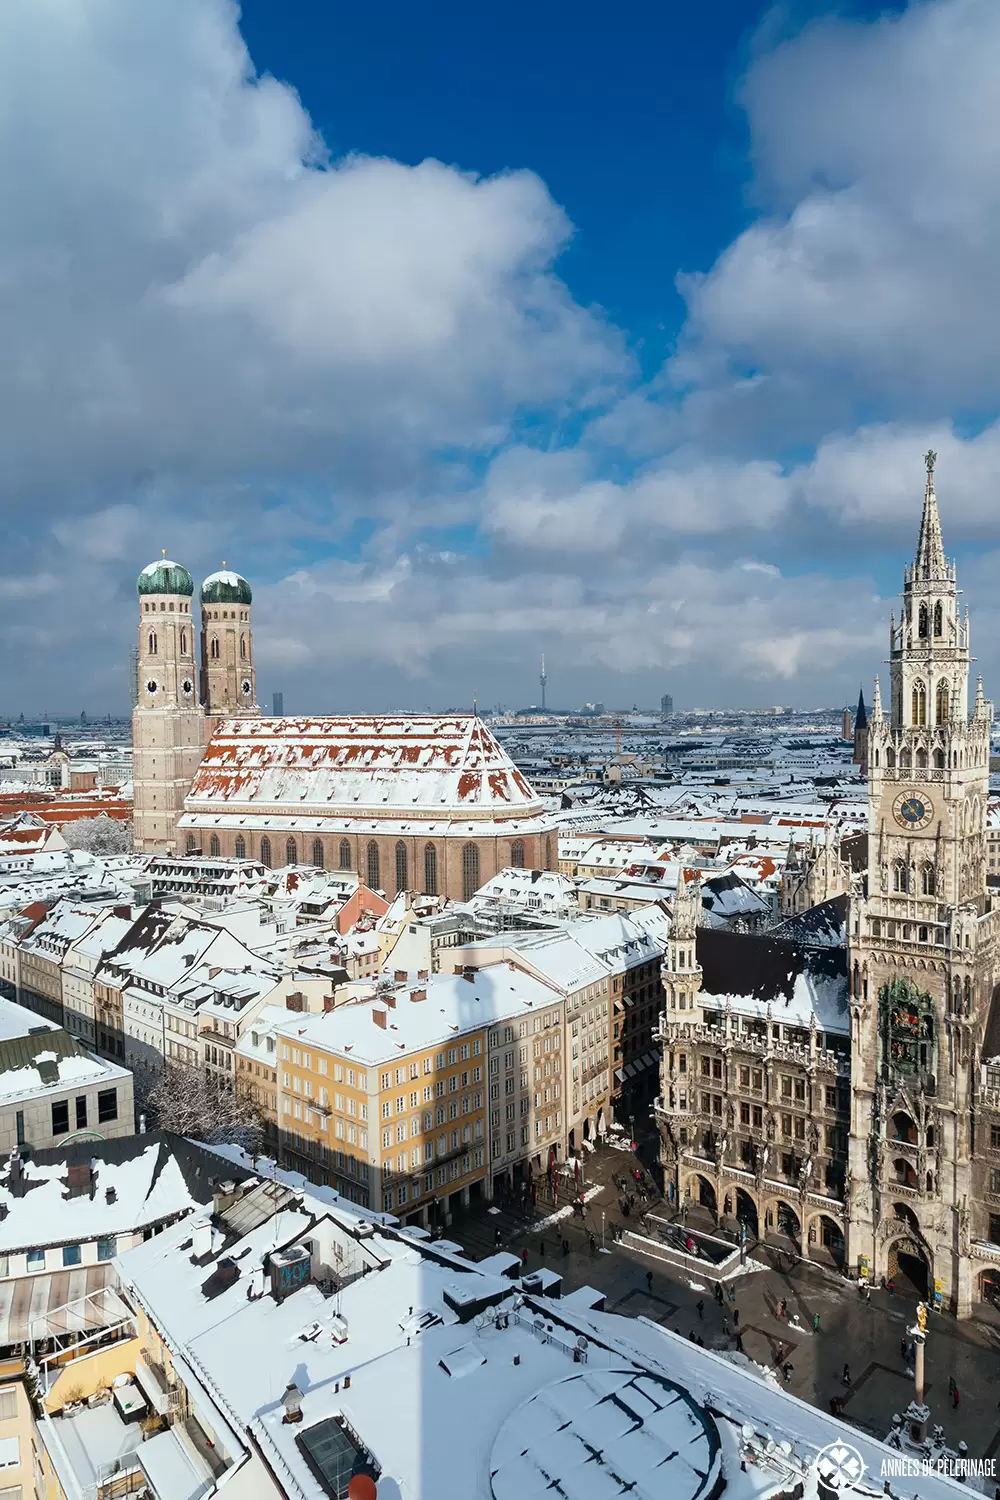 The New City Hall and the Church of Our lady in Munich in winter